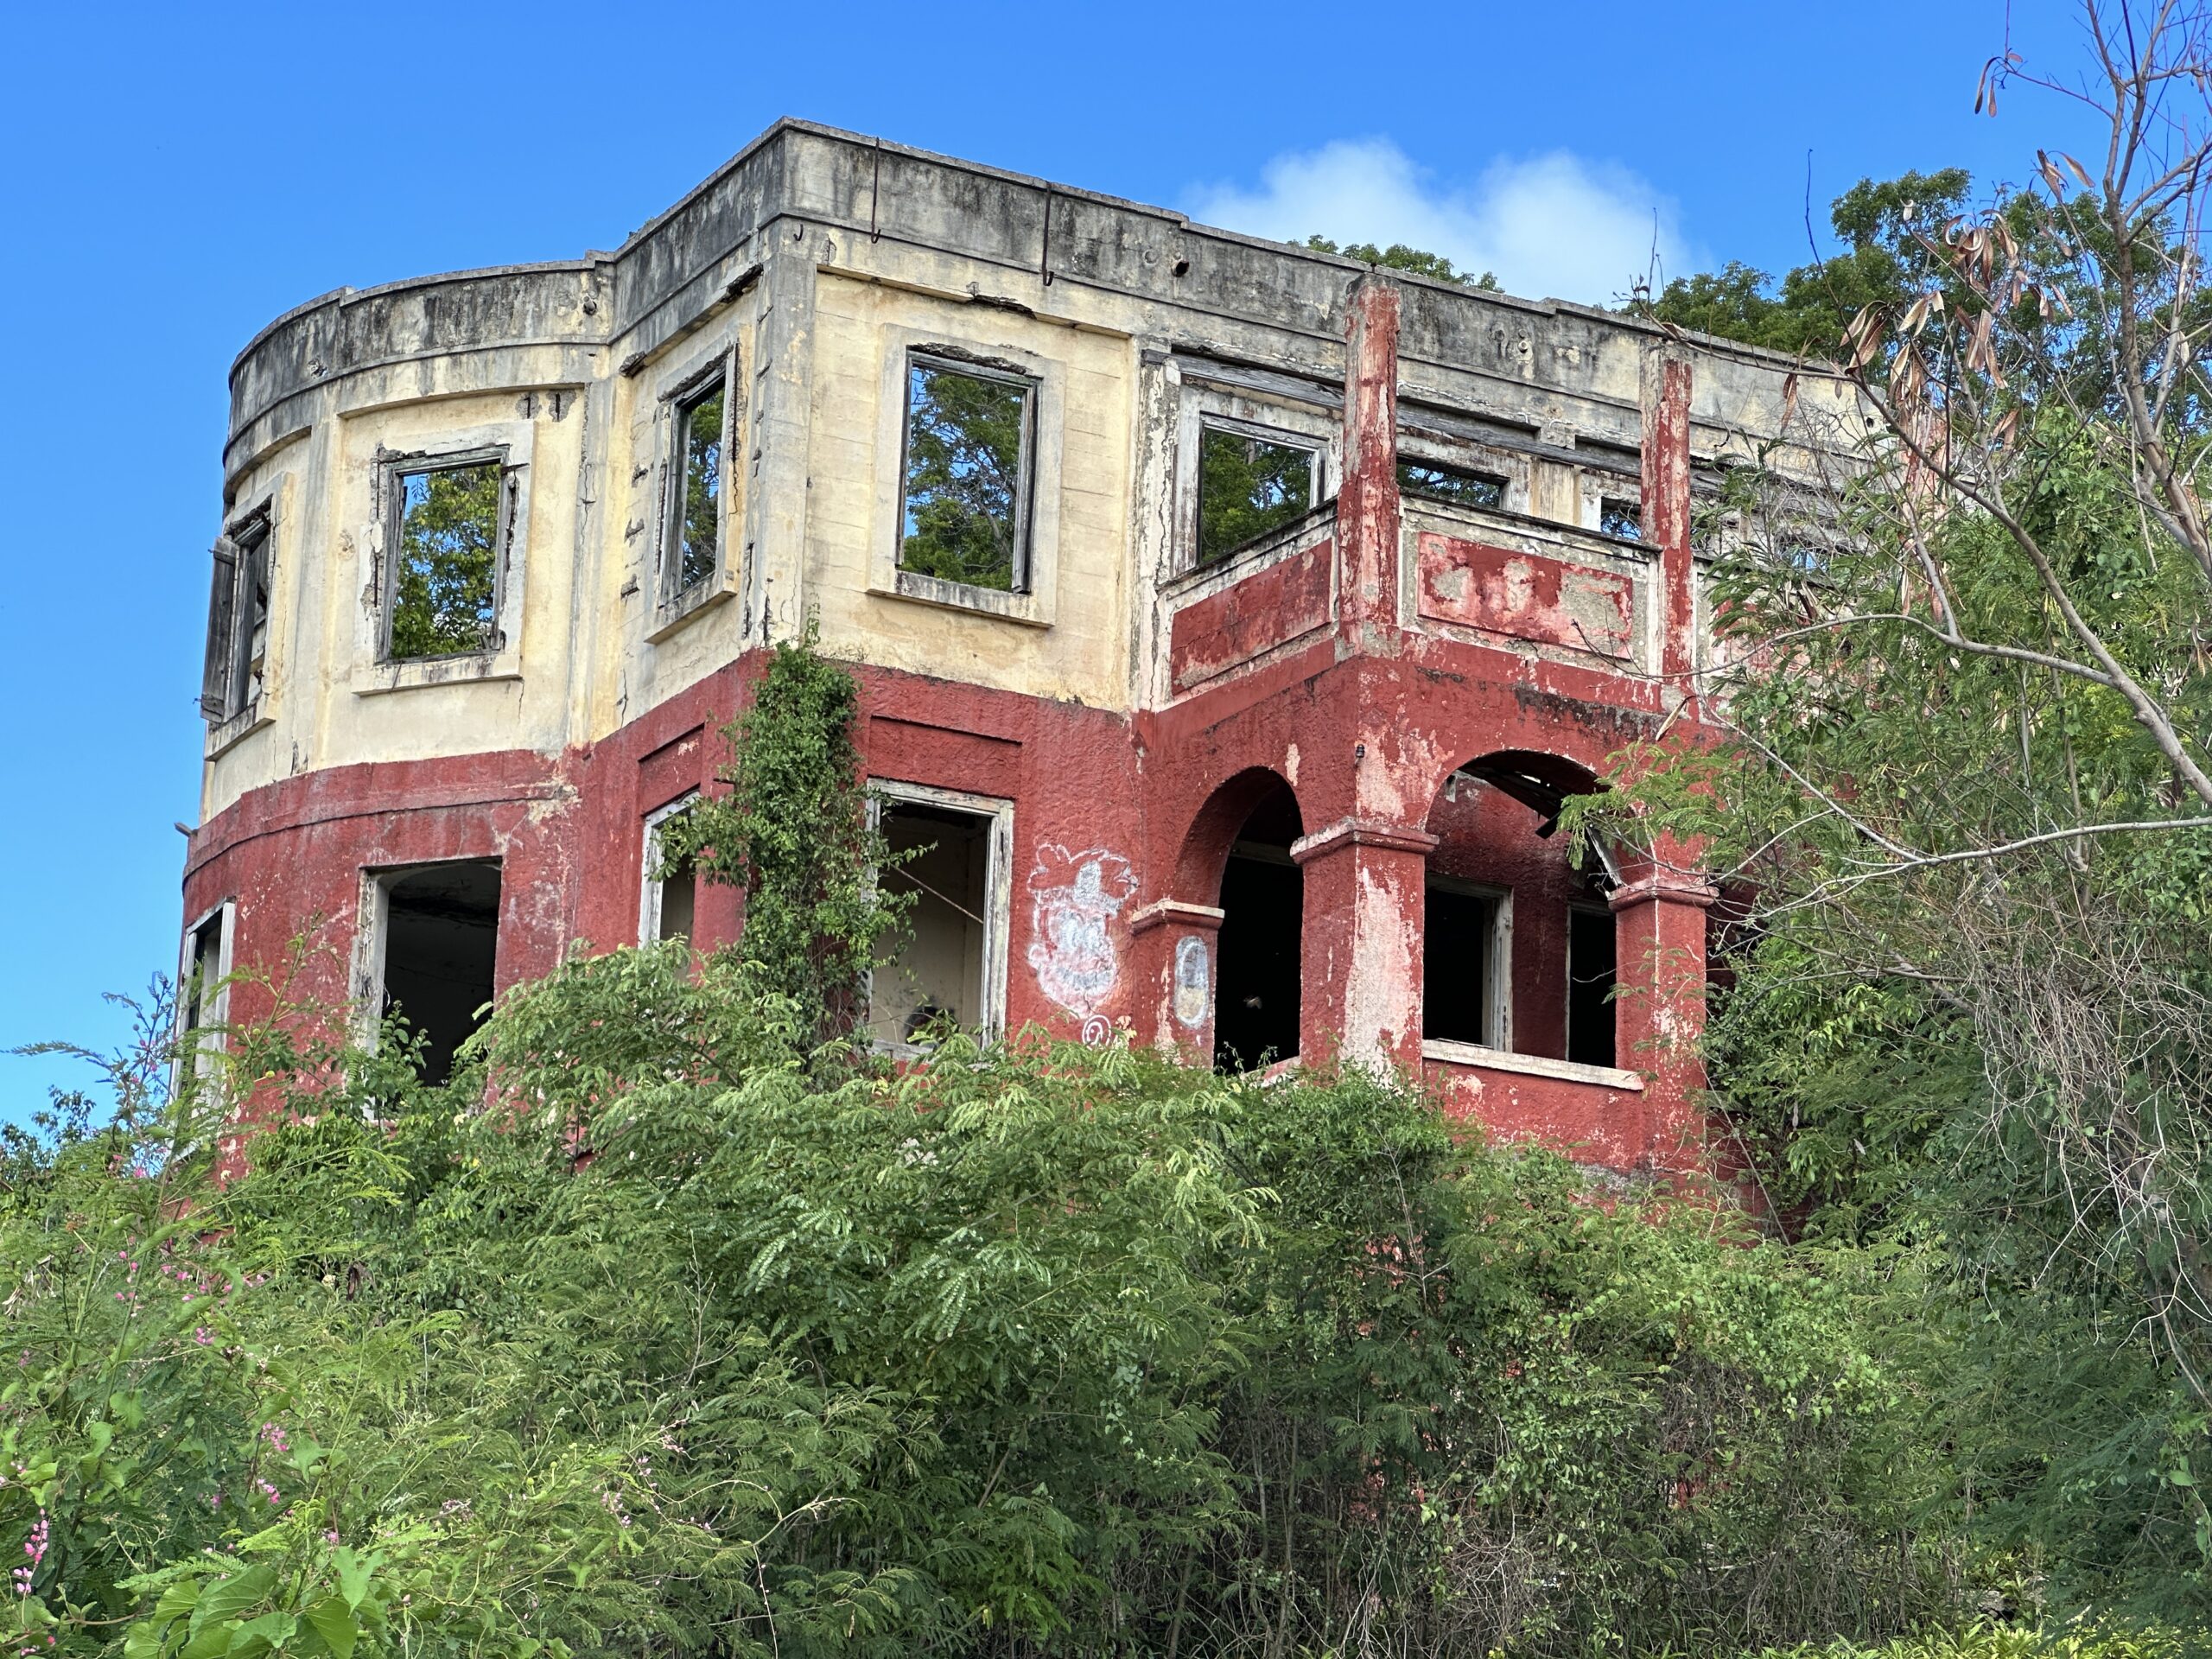 The former St. Croix Municipal Hospital is located along the bypass on St. Croix. It is a prominent landmark and can be seen from miles away sitting high on a hill. It has continued to deteriorate for many years. Photo illustrates current condition on August 4, 2023. (Source photo by Linda Morland)